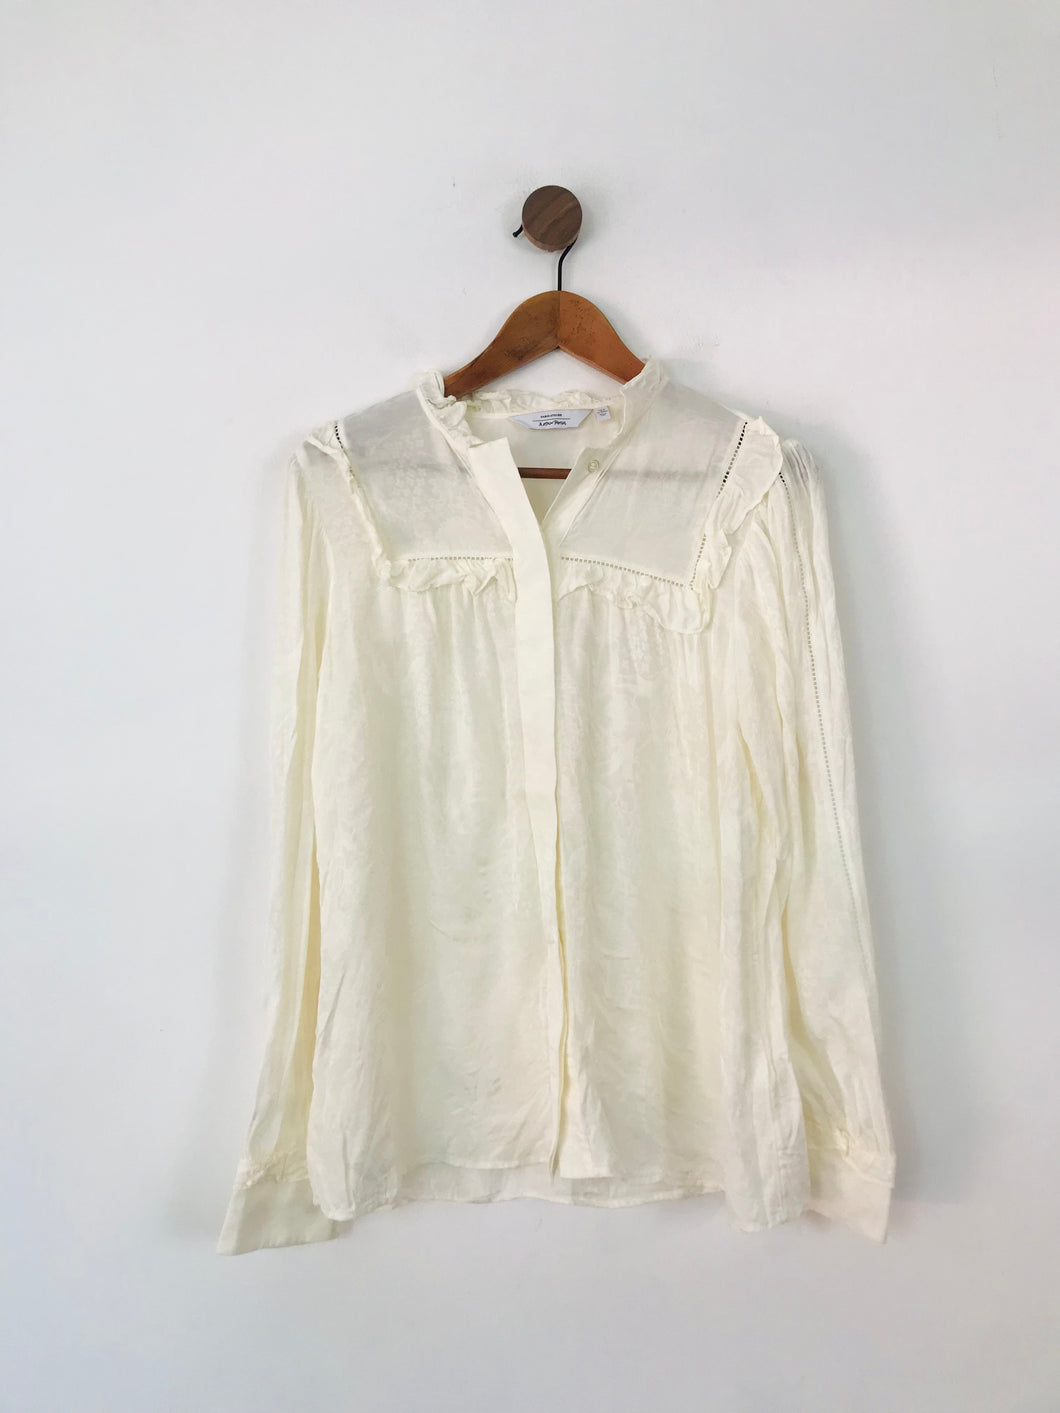 & Other Stories Women's Ruffle Button Up Blouse | 38 UK10 | White